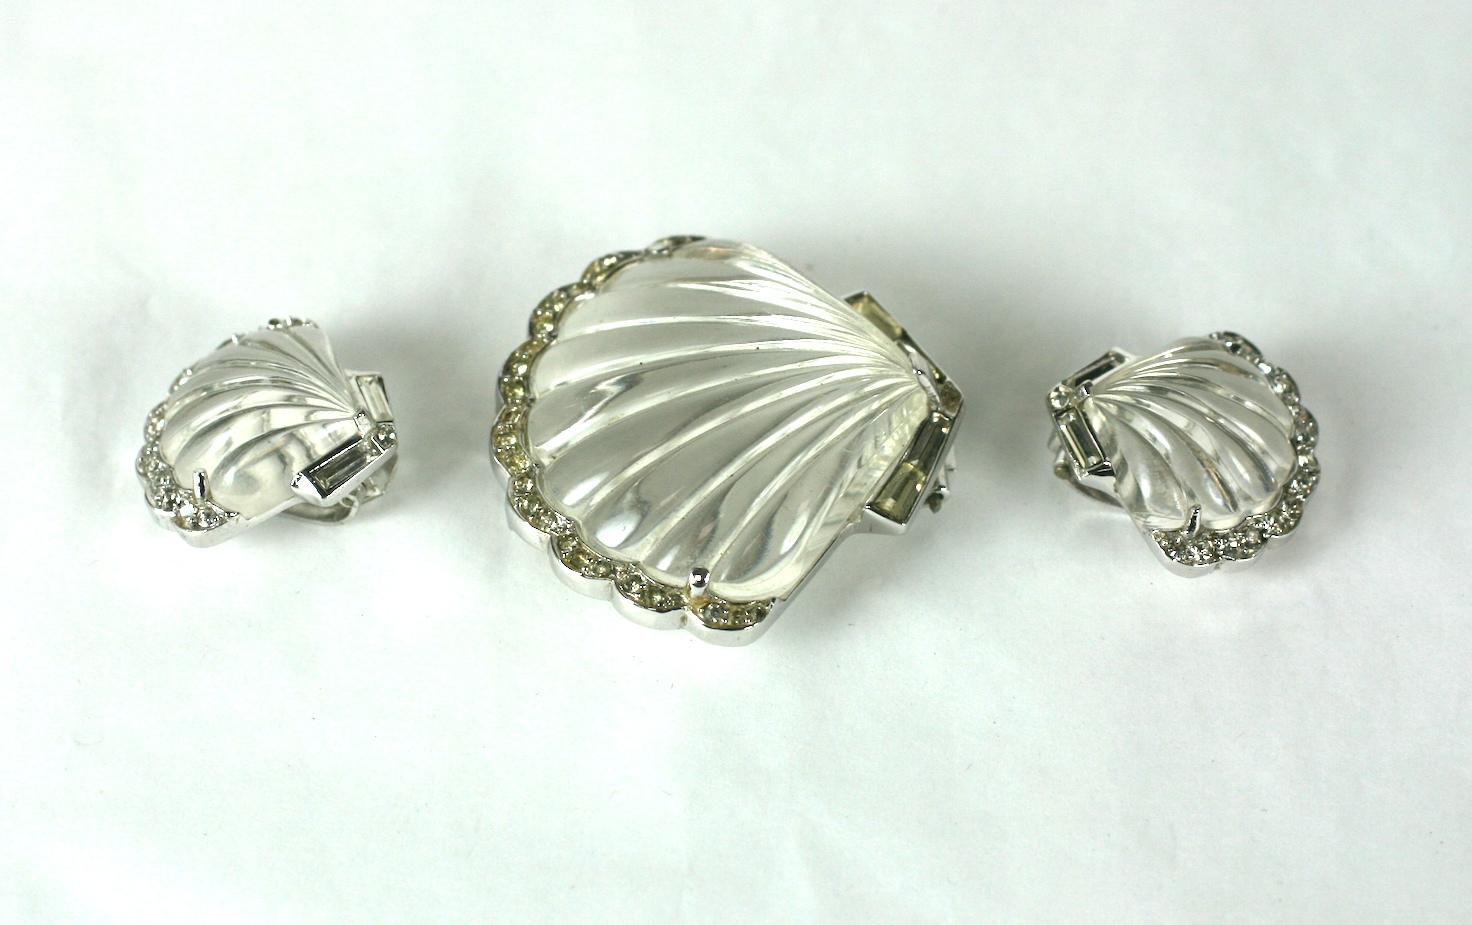 Alfred Phillipe for Trifari Moon Shell Jelly Belly demi parure consisting of a fur clip and matching ear clips. Of rhodium plated base metal, crystal rhinestones, and molded lucite scallop shells to resemble rock crystal.  
Marked Trifari with